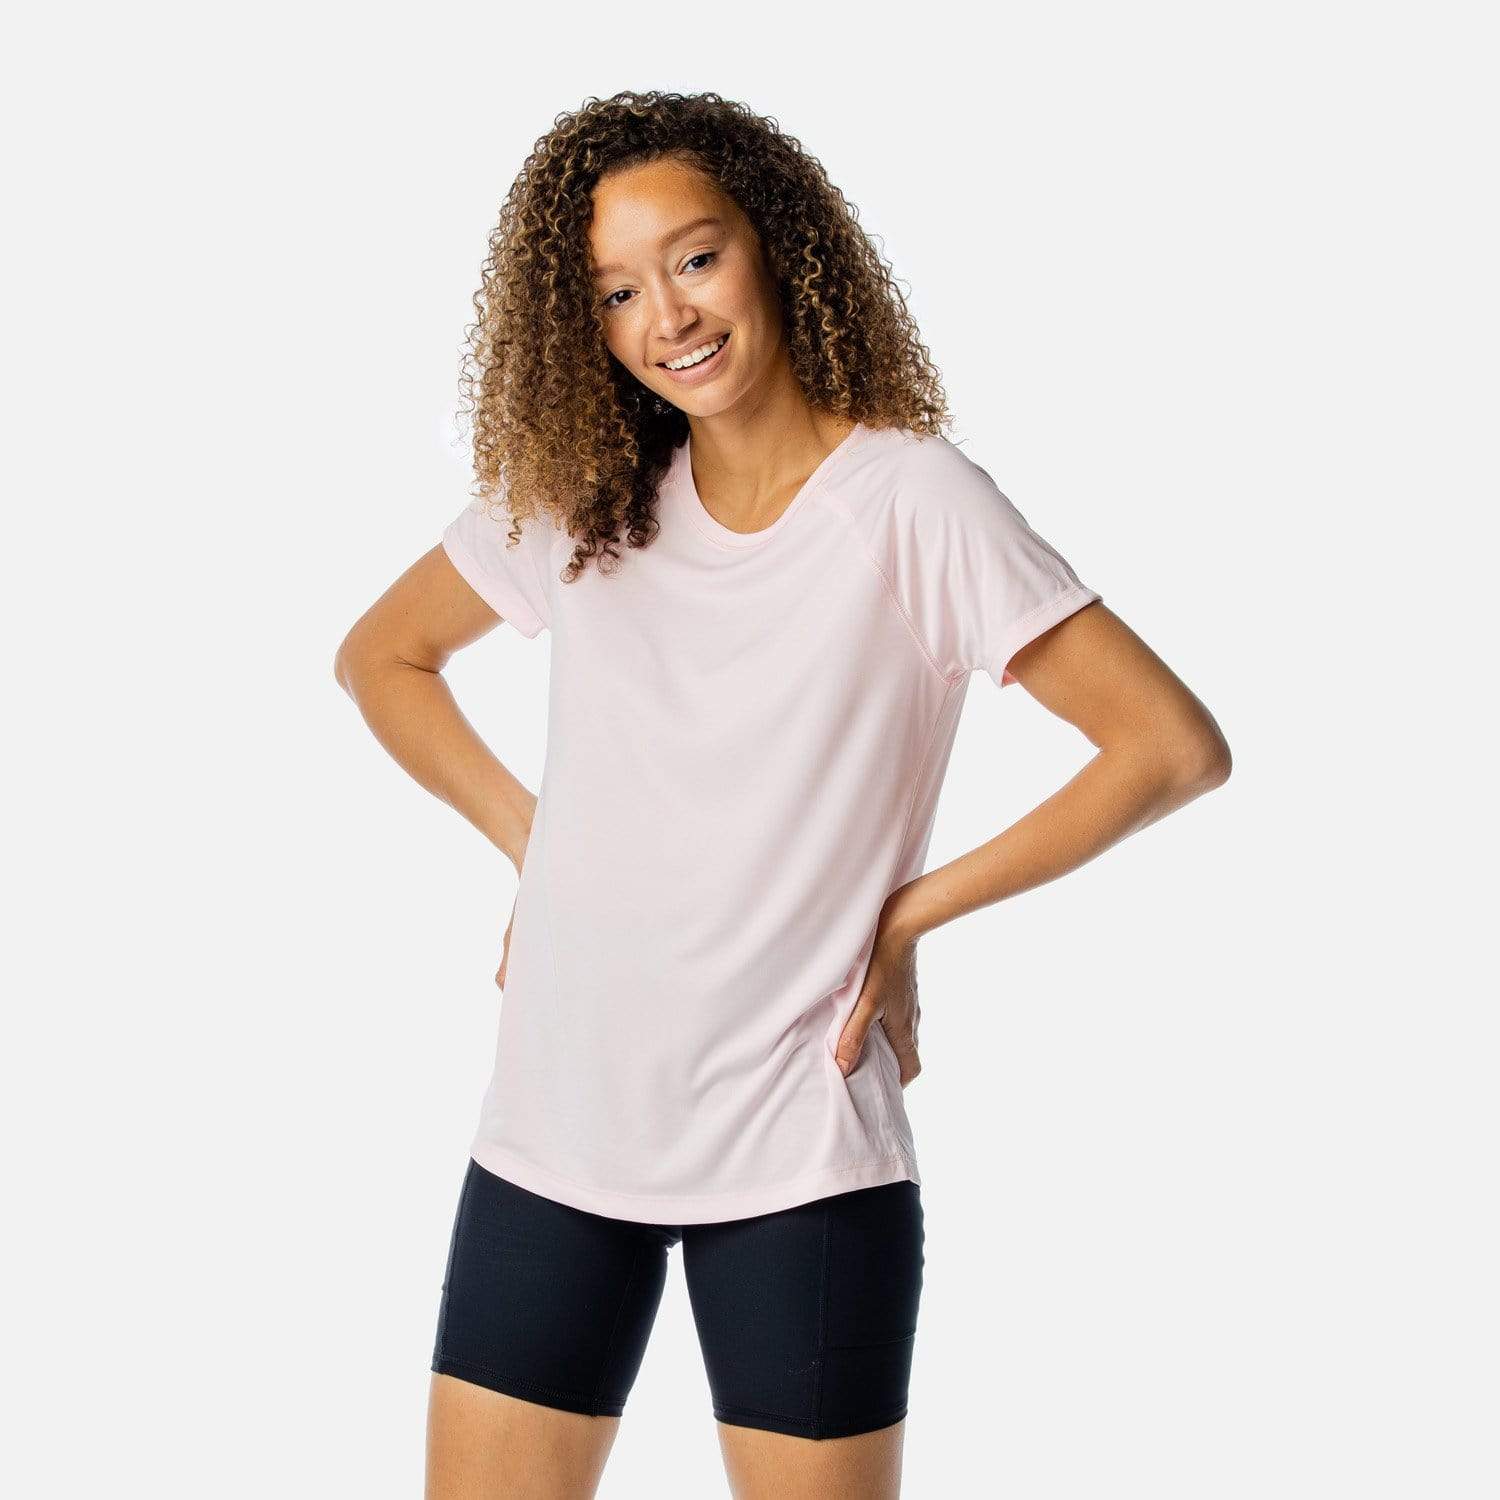 Women's Short Sleeve Shirts, Explore our New Arrivals